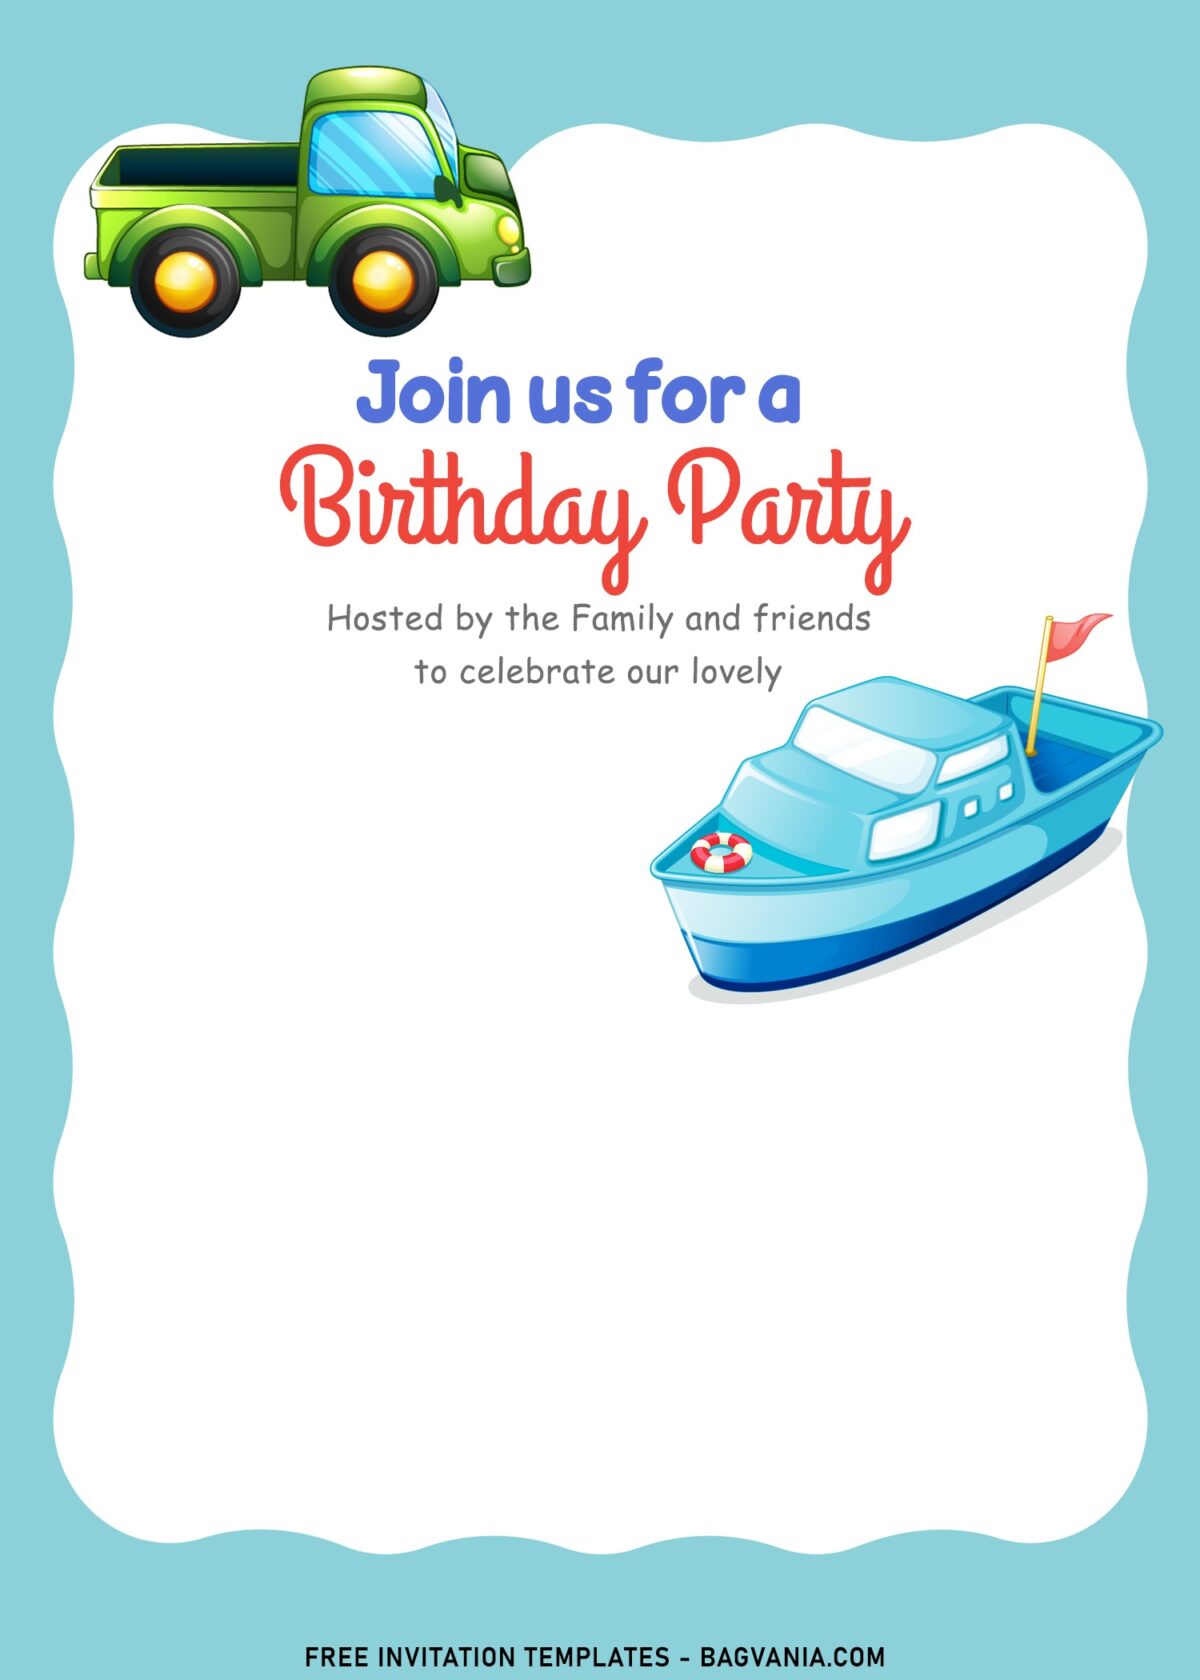 10+ Best And Cute Birthday Invitation Templates For Preschooler with boat